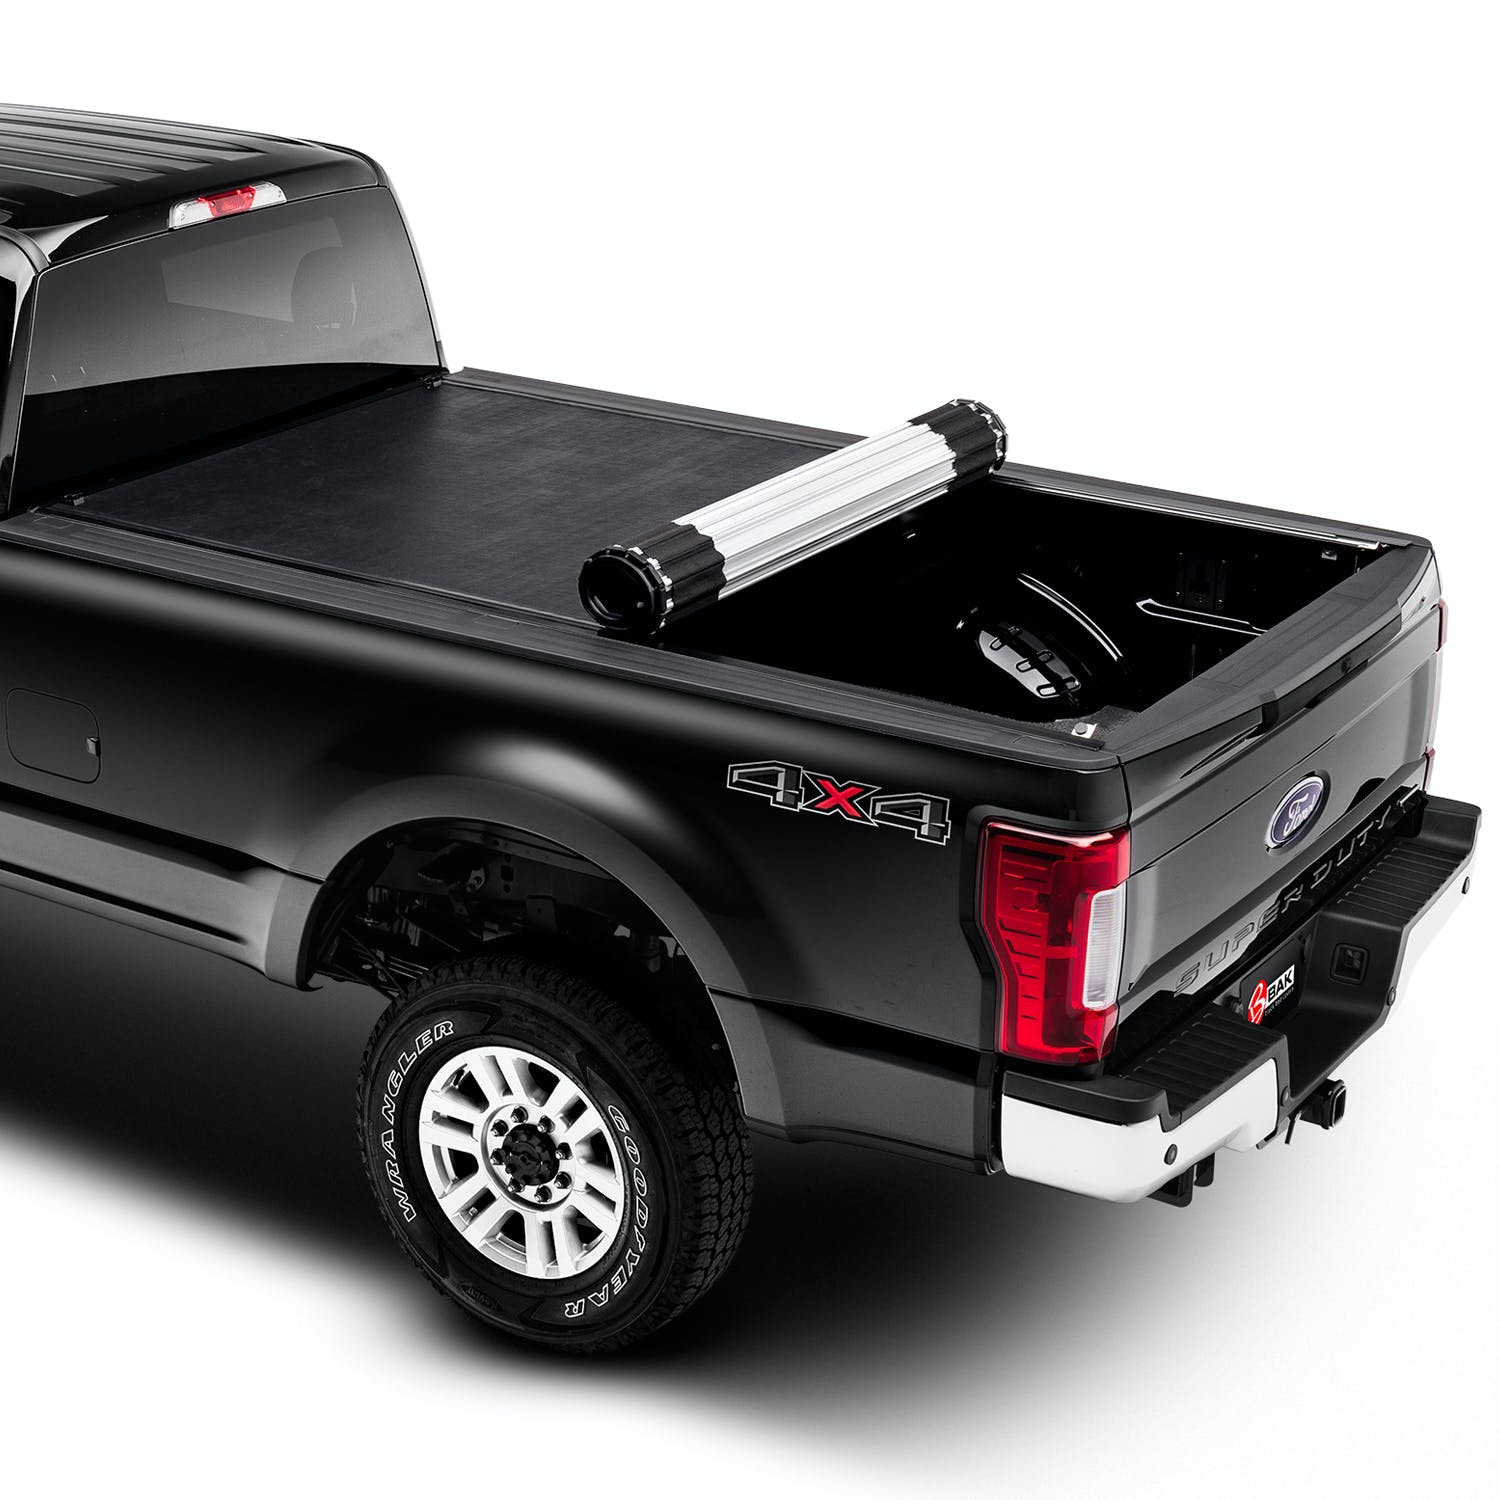 BAK Industries 39310 Revolver X2 Hard Rolling Truck Bed Cover